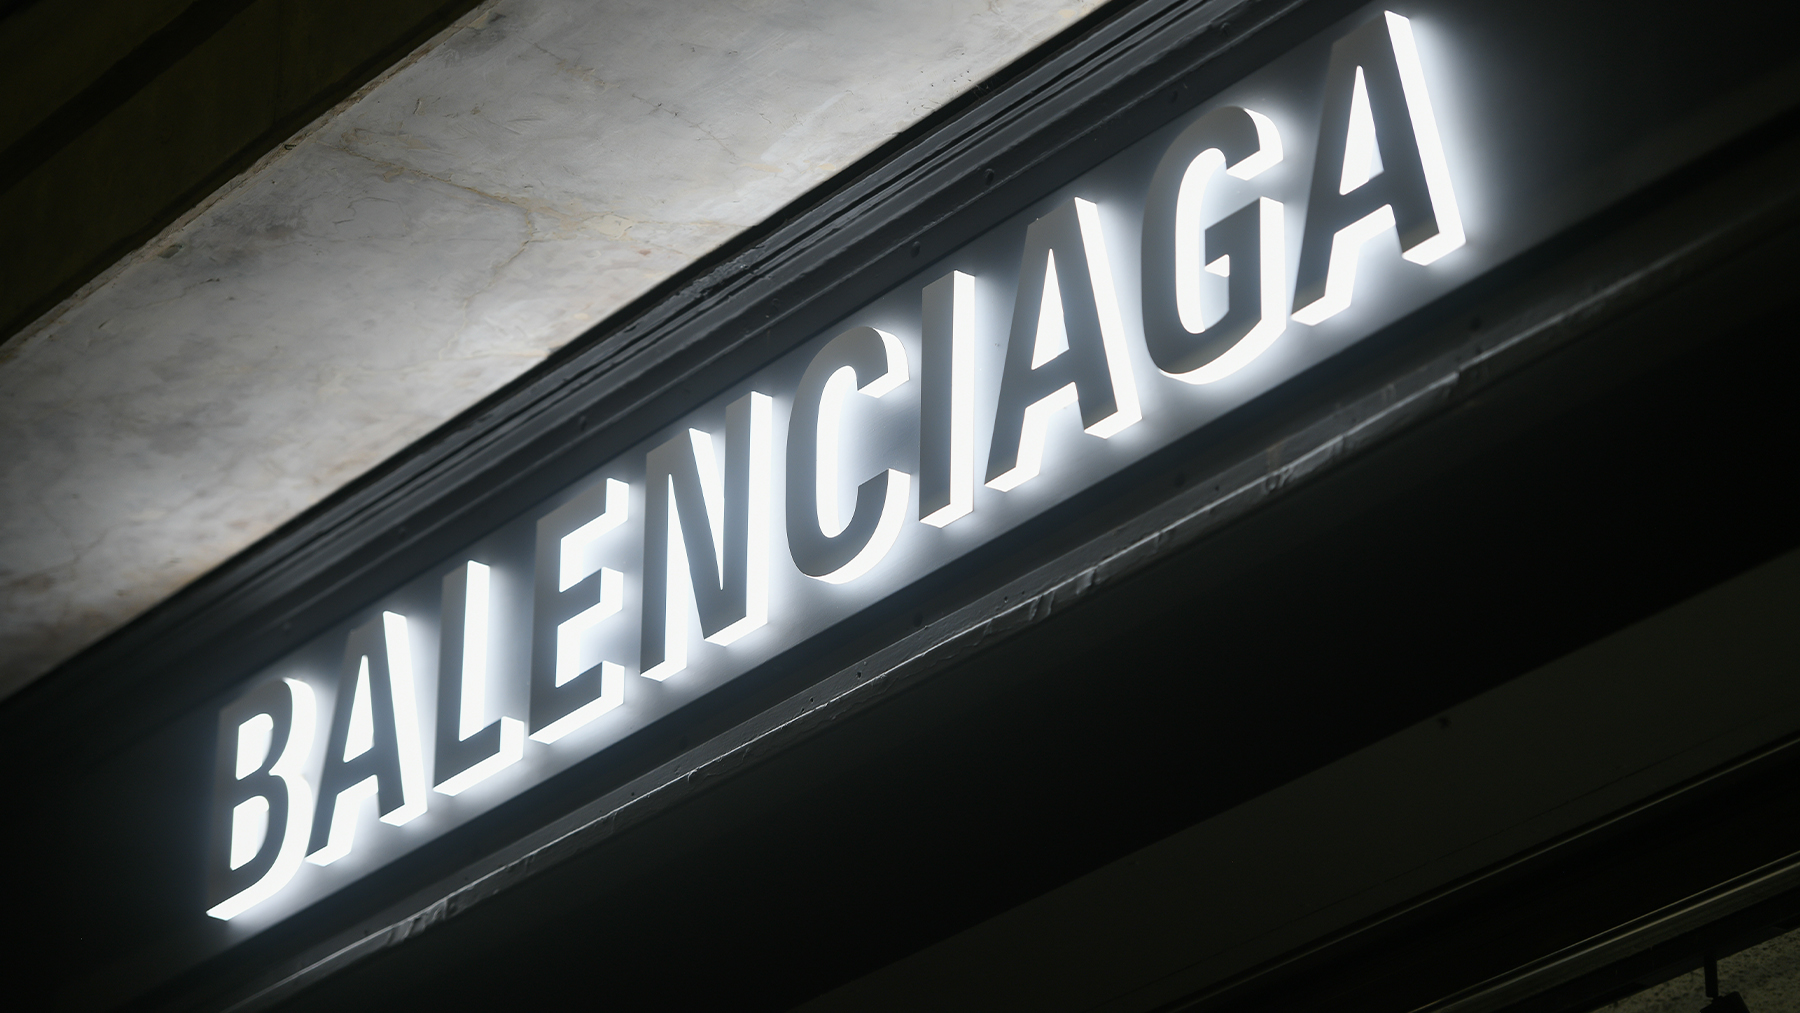 ENGLISH 09234  Balenciaga brand is easily distinguishable from other  brands by its name design  Course Hero